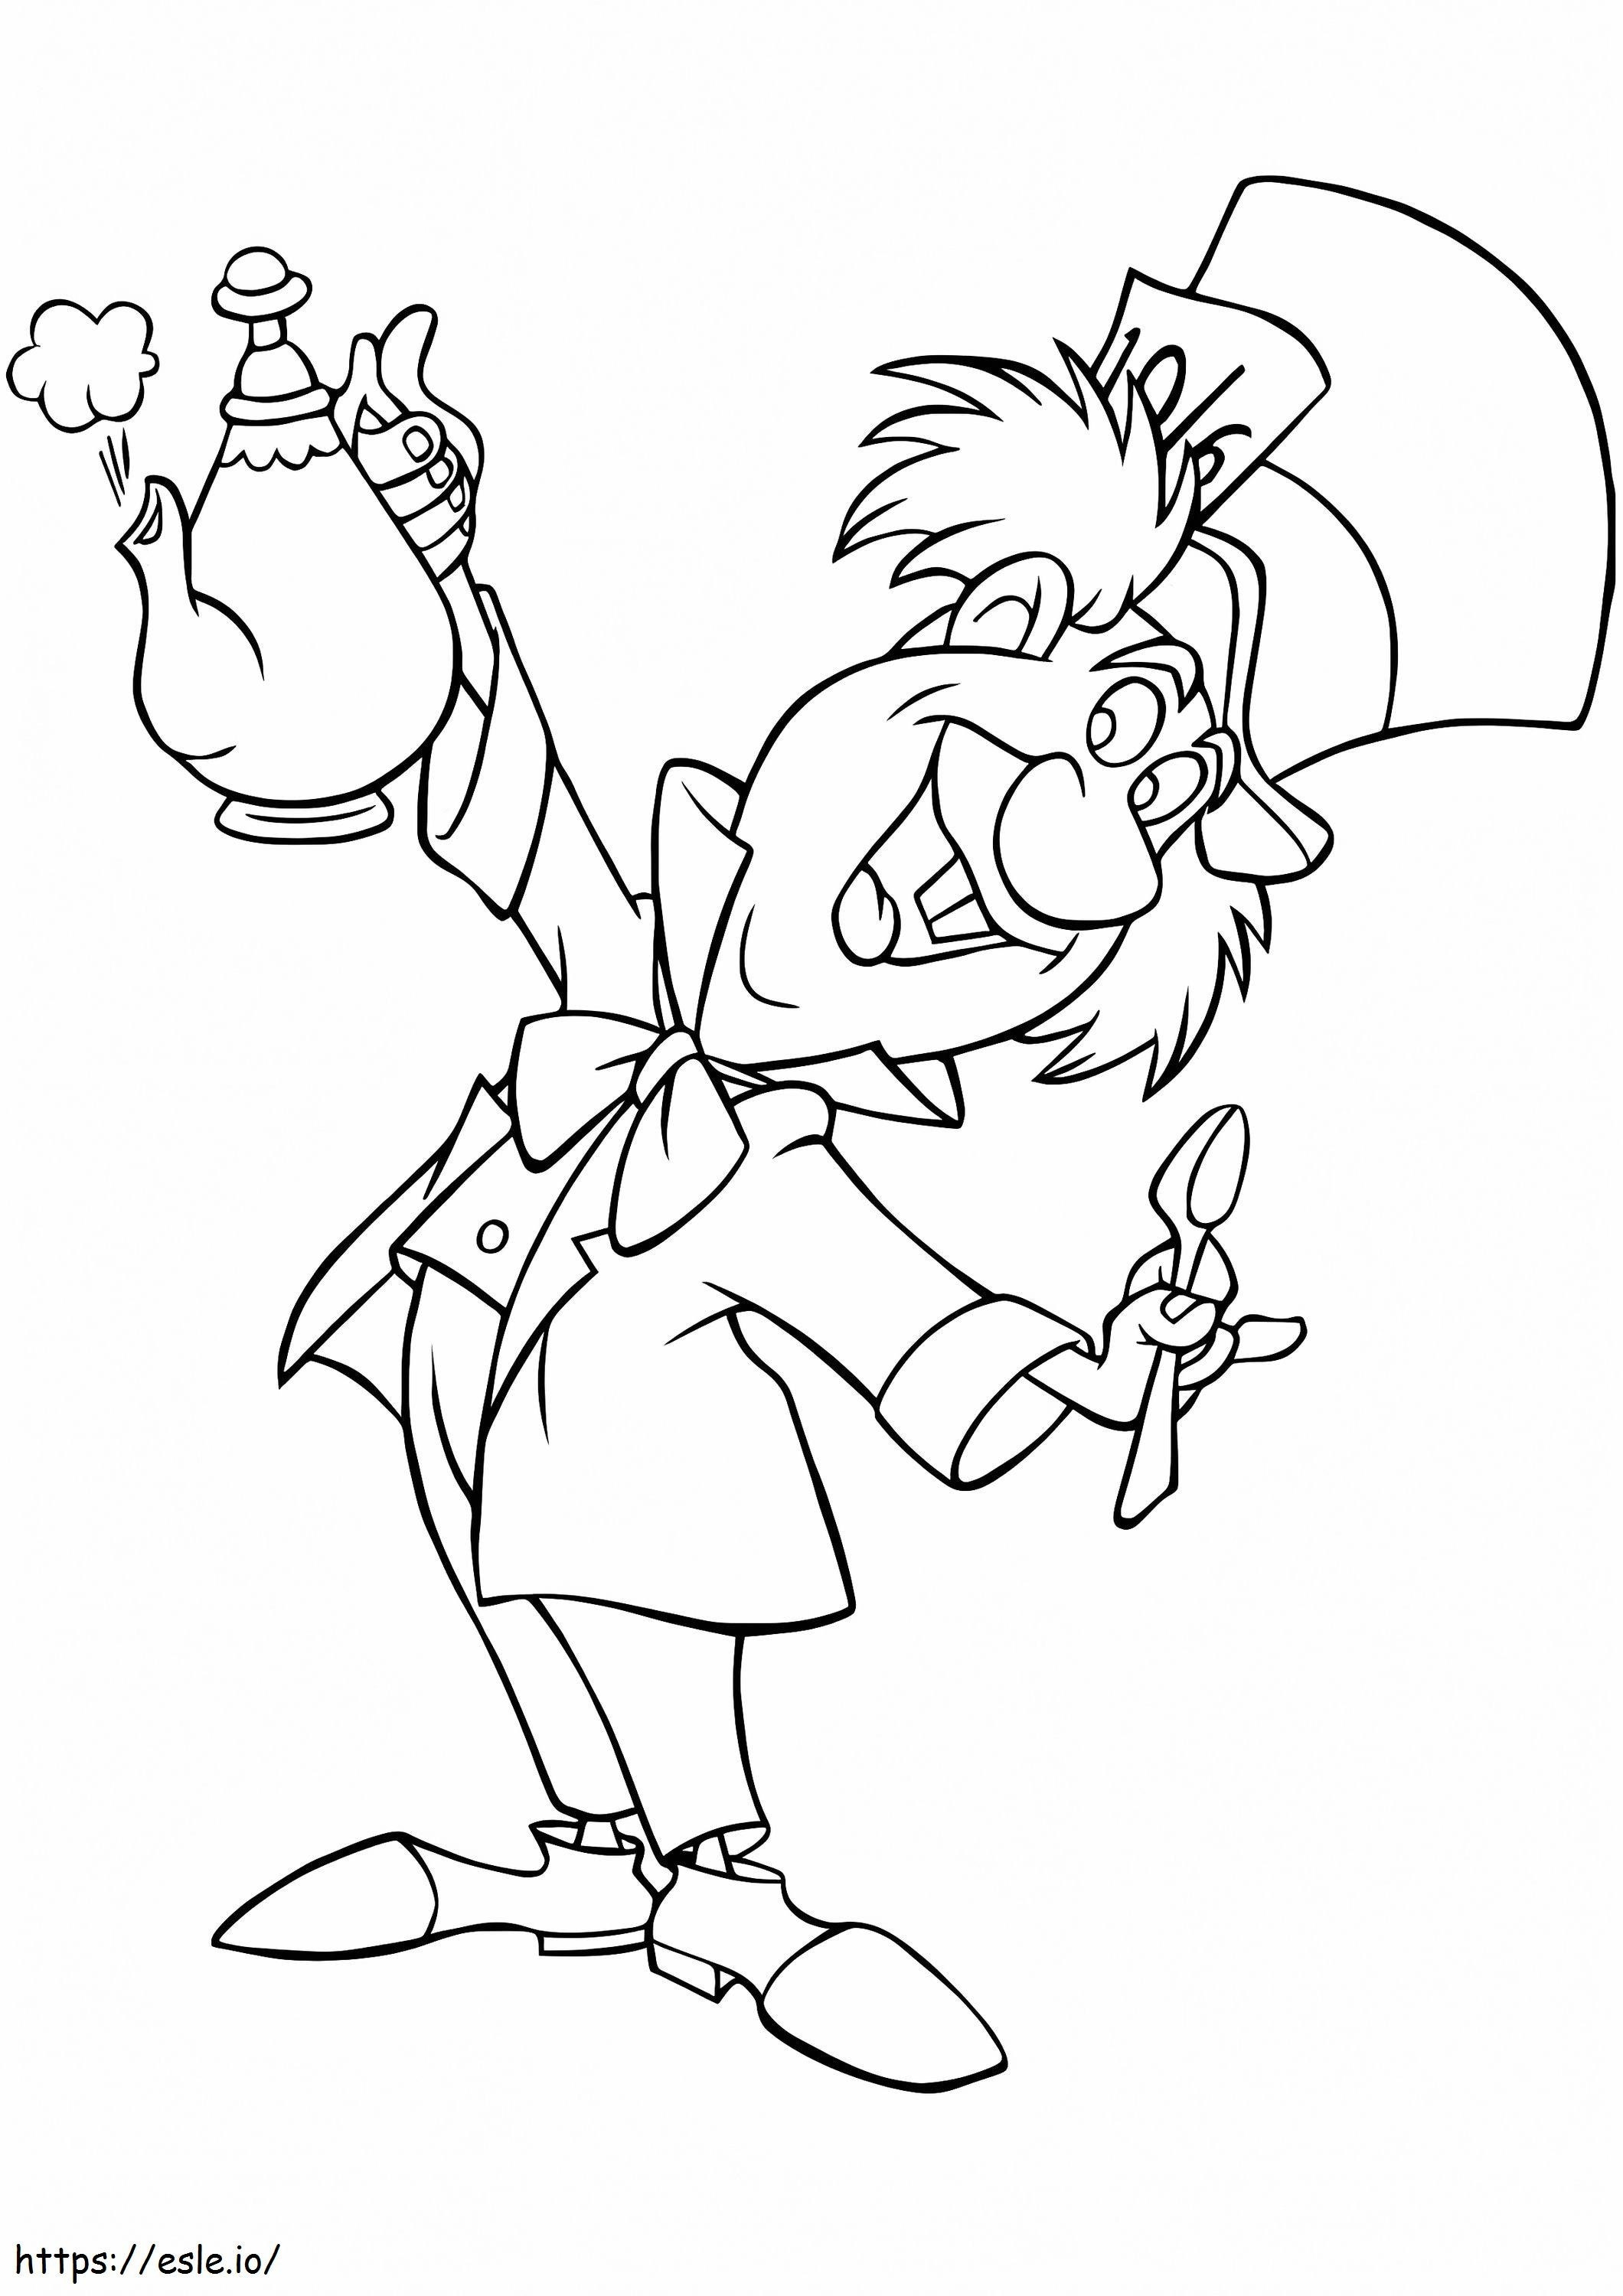 1526974964 A Mad Hatter A4 coloring page